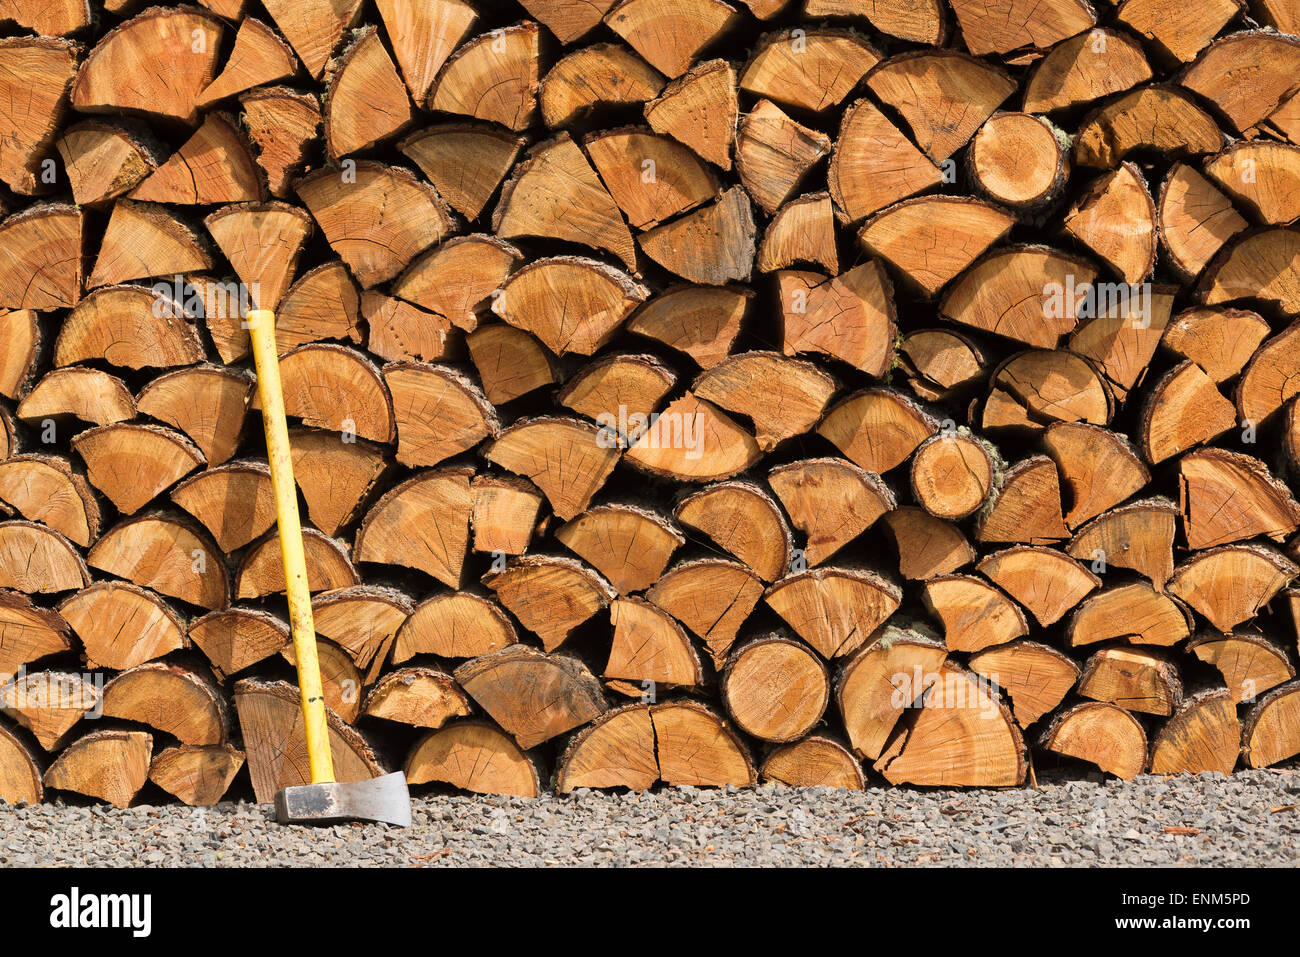 Splitting maul and neatly stacked pile of split firewood. Stock Photo